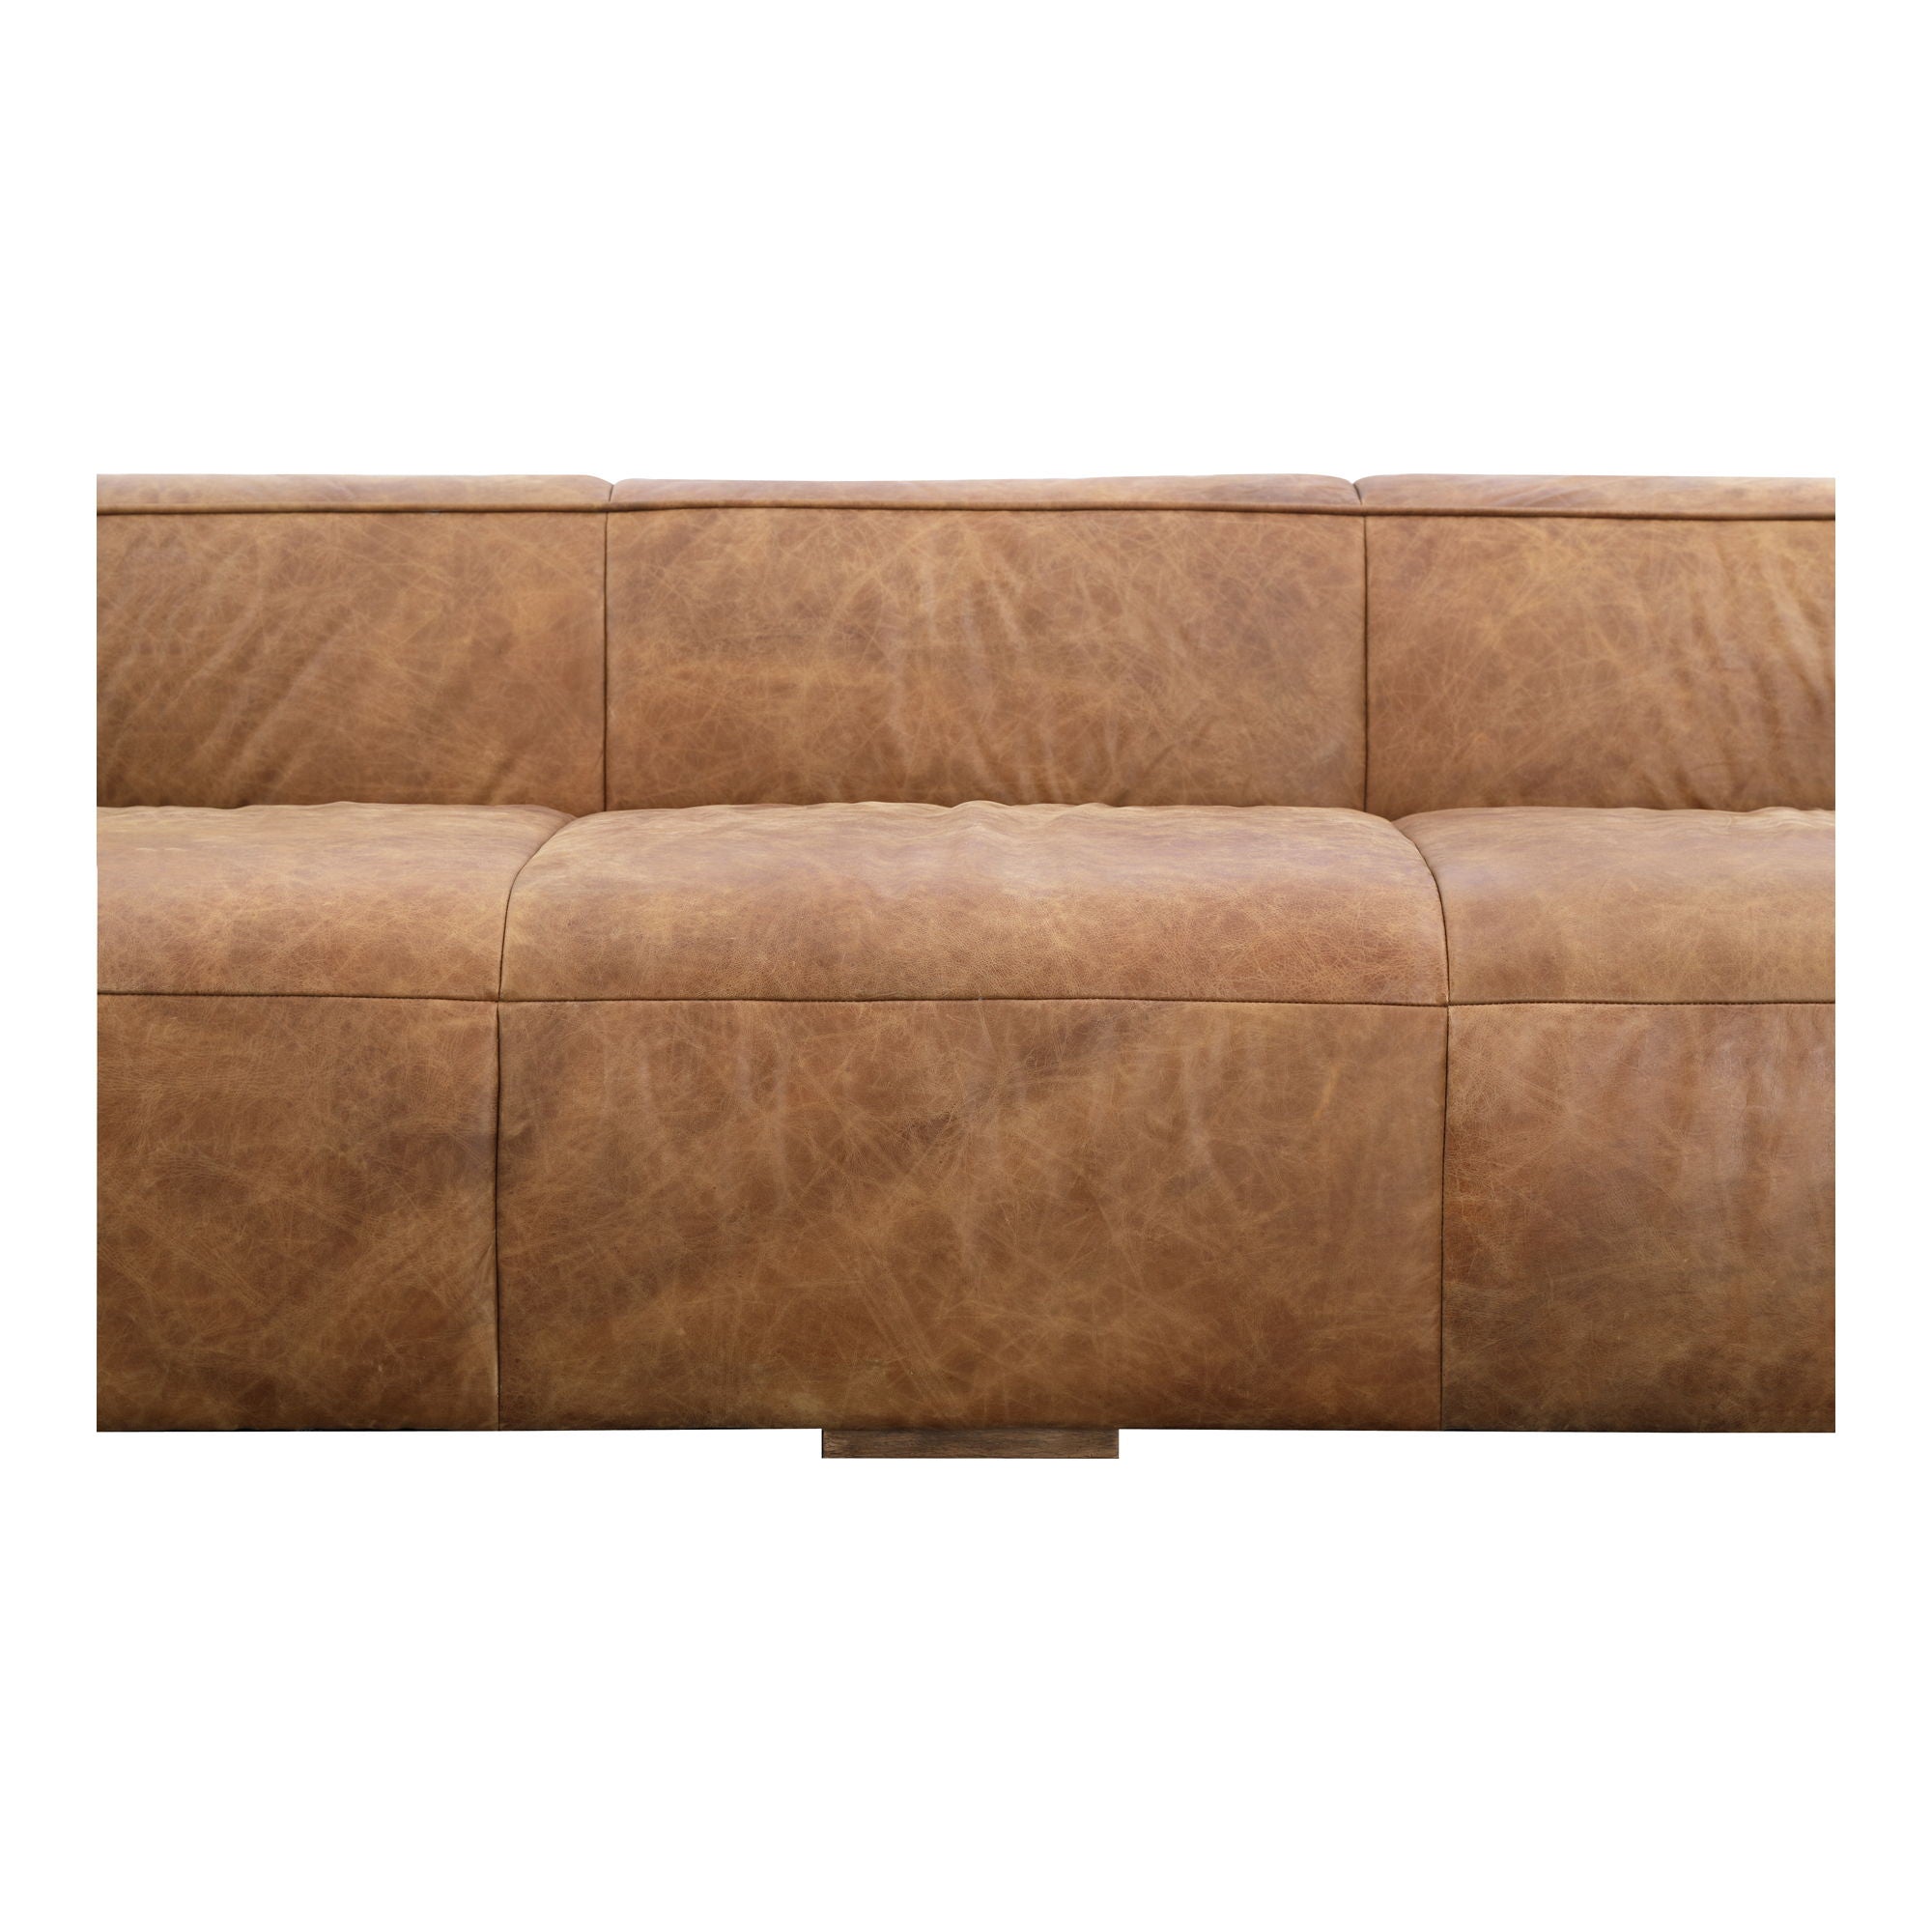 Bolton Sofa - Cappuccino Brown Top-Grain Leather - Comfortable and Stylish Living Room Furniture